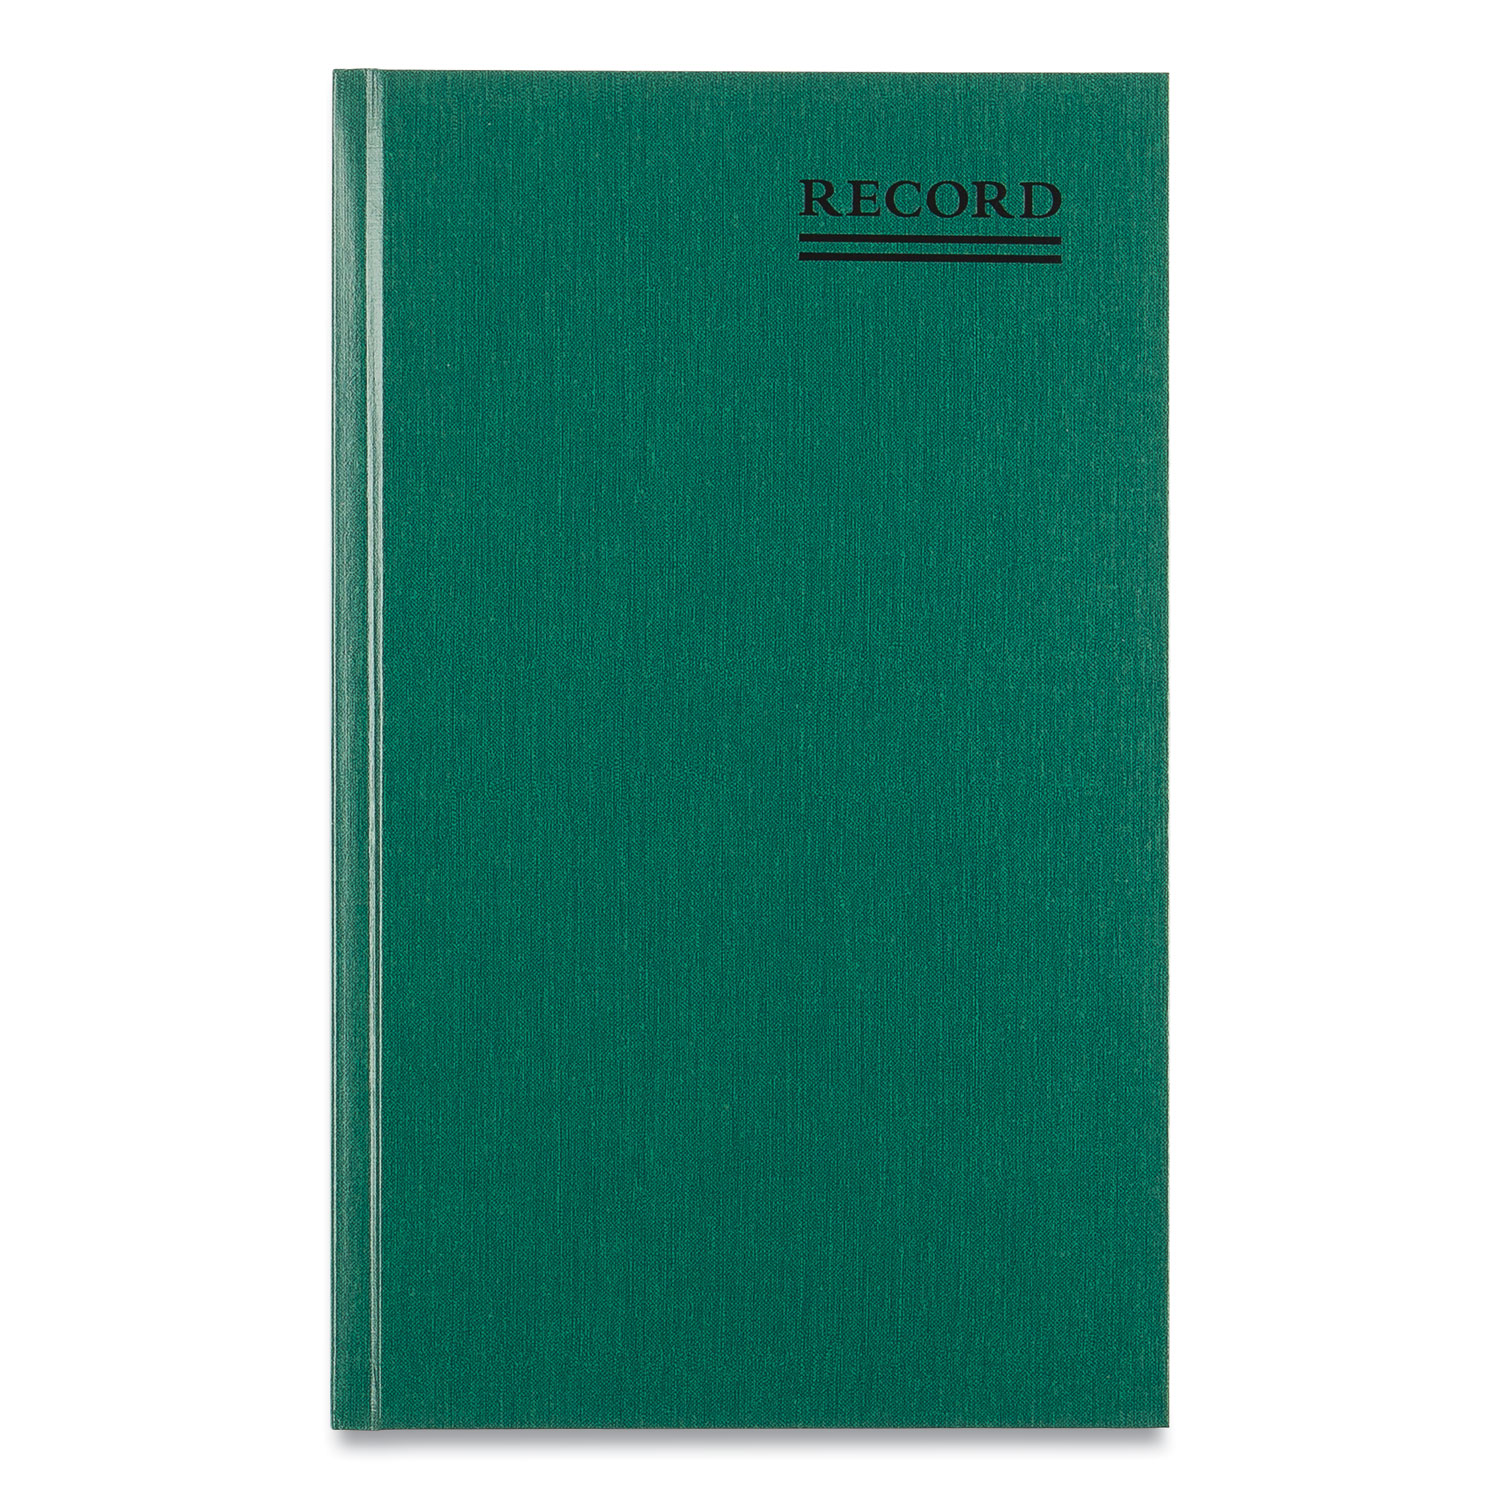 National® Emerald Series Account Book, Green Cover, 12.25 x 7.25 Sheets,  500 Sheets/Book Quipply